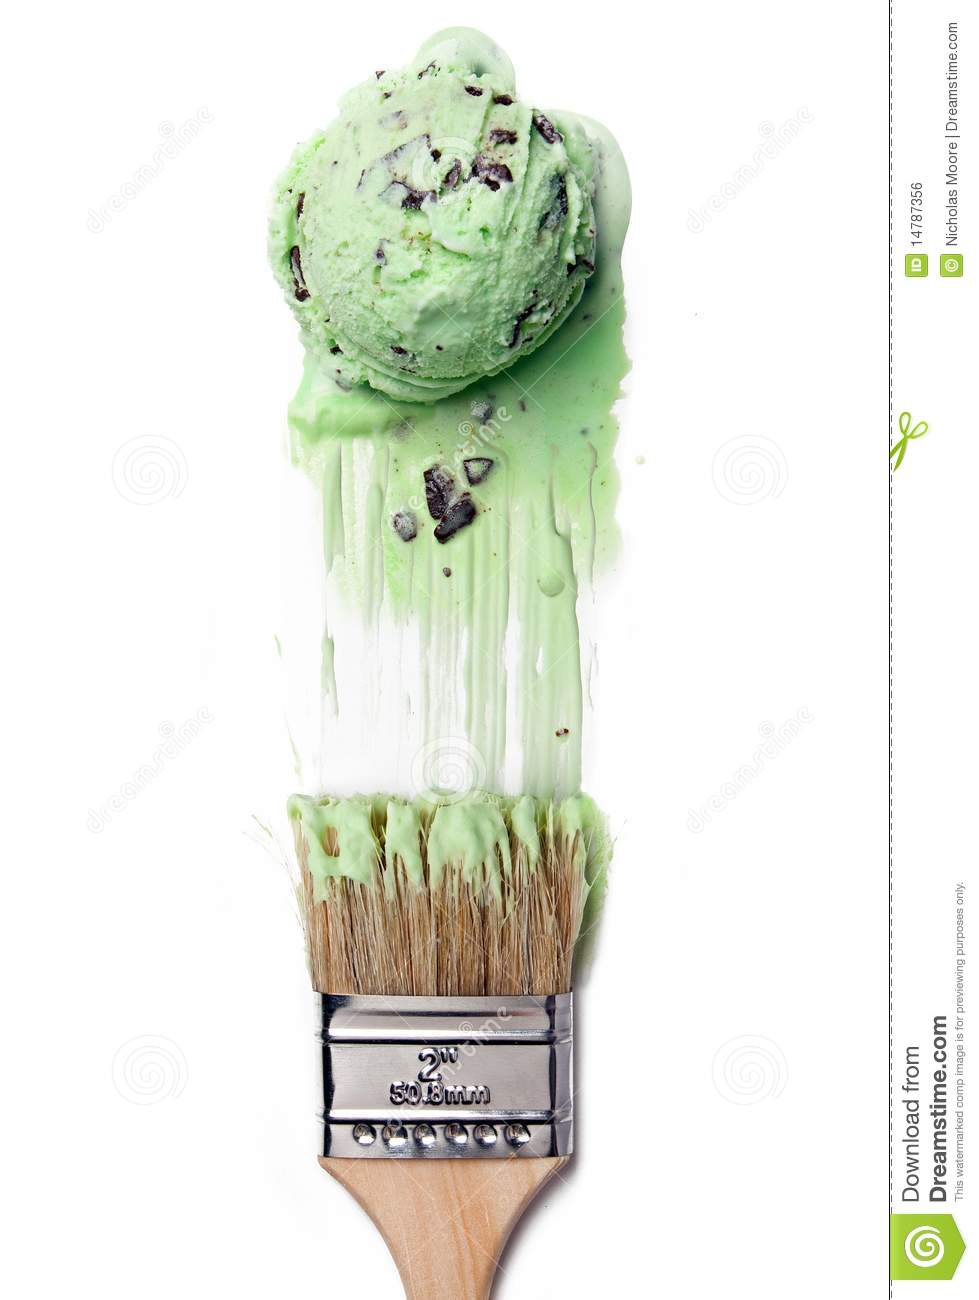 Chocolate Chip Mint Paint Royalty Free Stock Image   Image  14787356